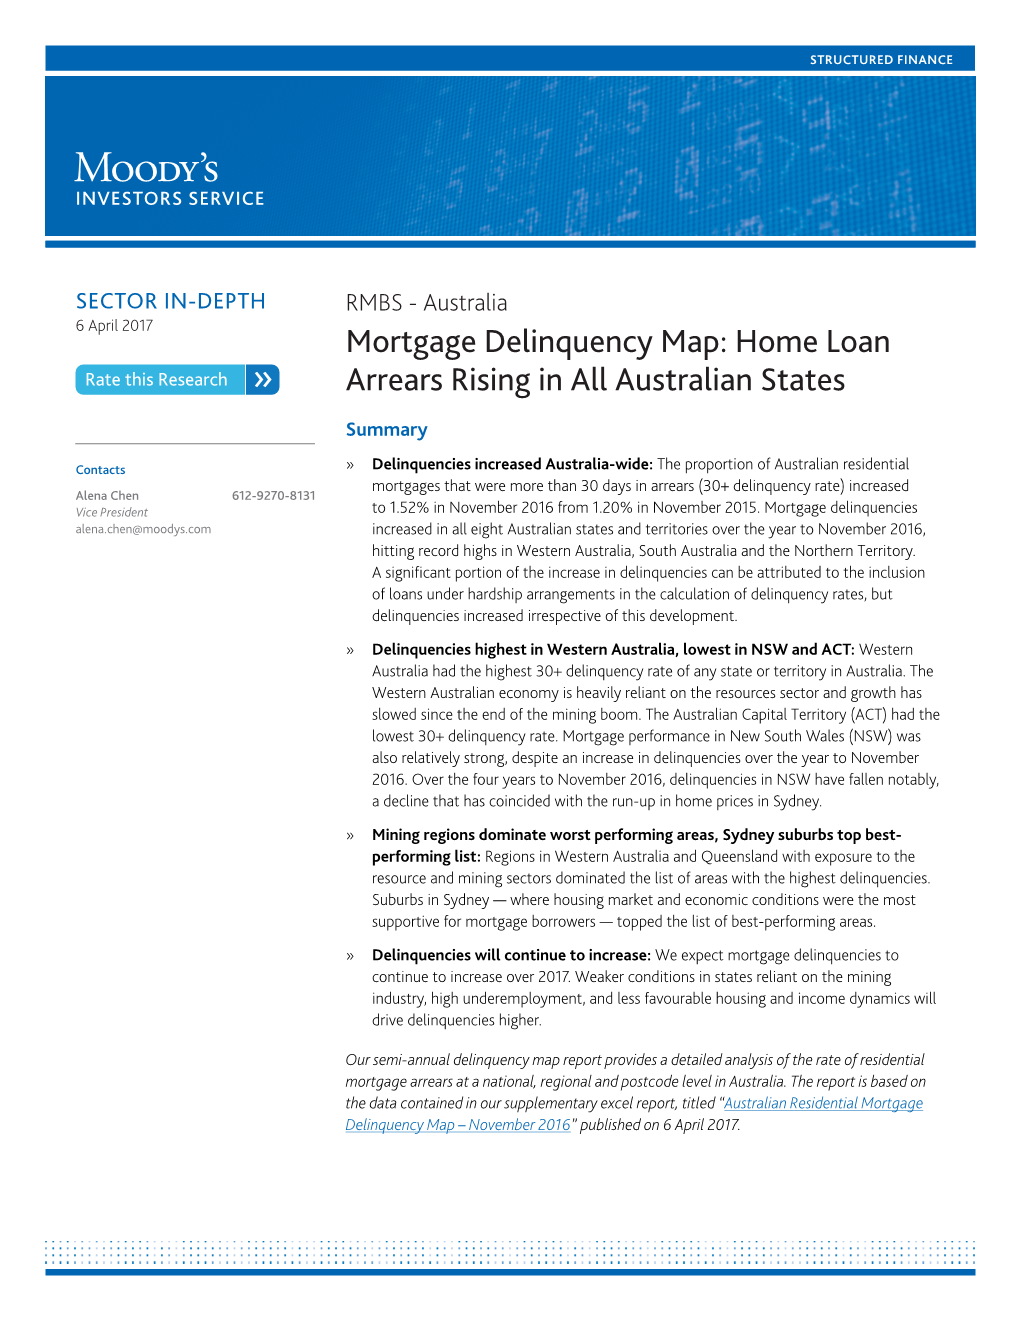 Mortgage Delinquency Map: Home Loan Arrears Rising in All Australian States